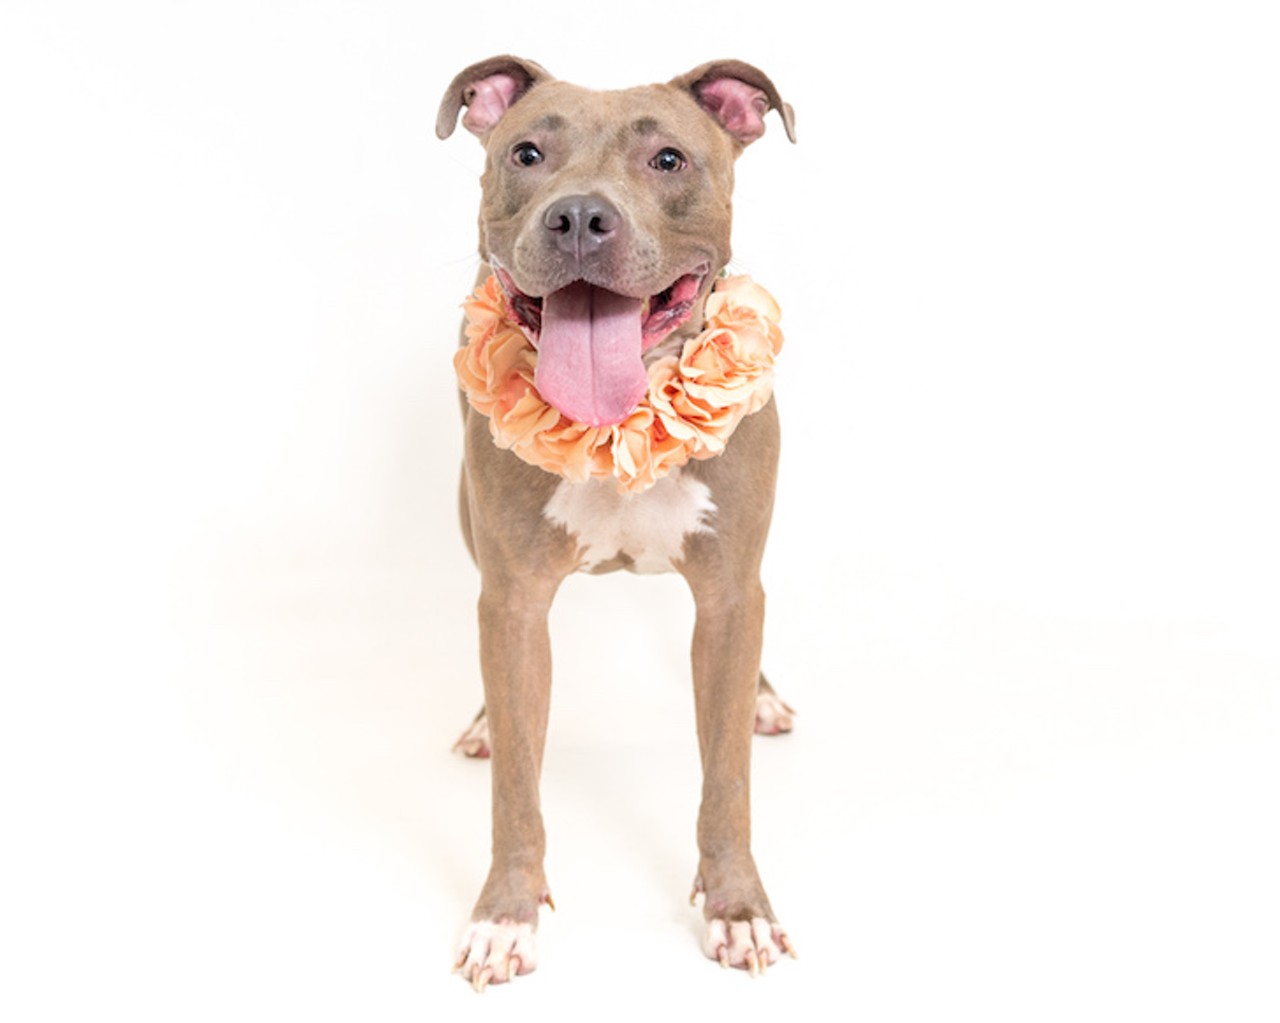 38 adoptable dogs available right now at Orange County Animal Services